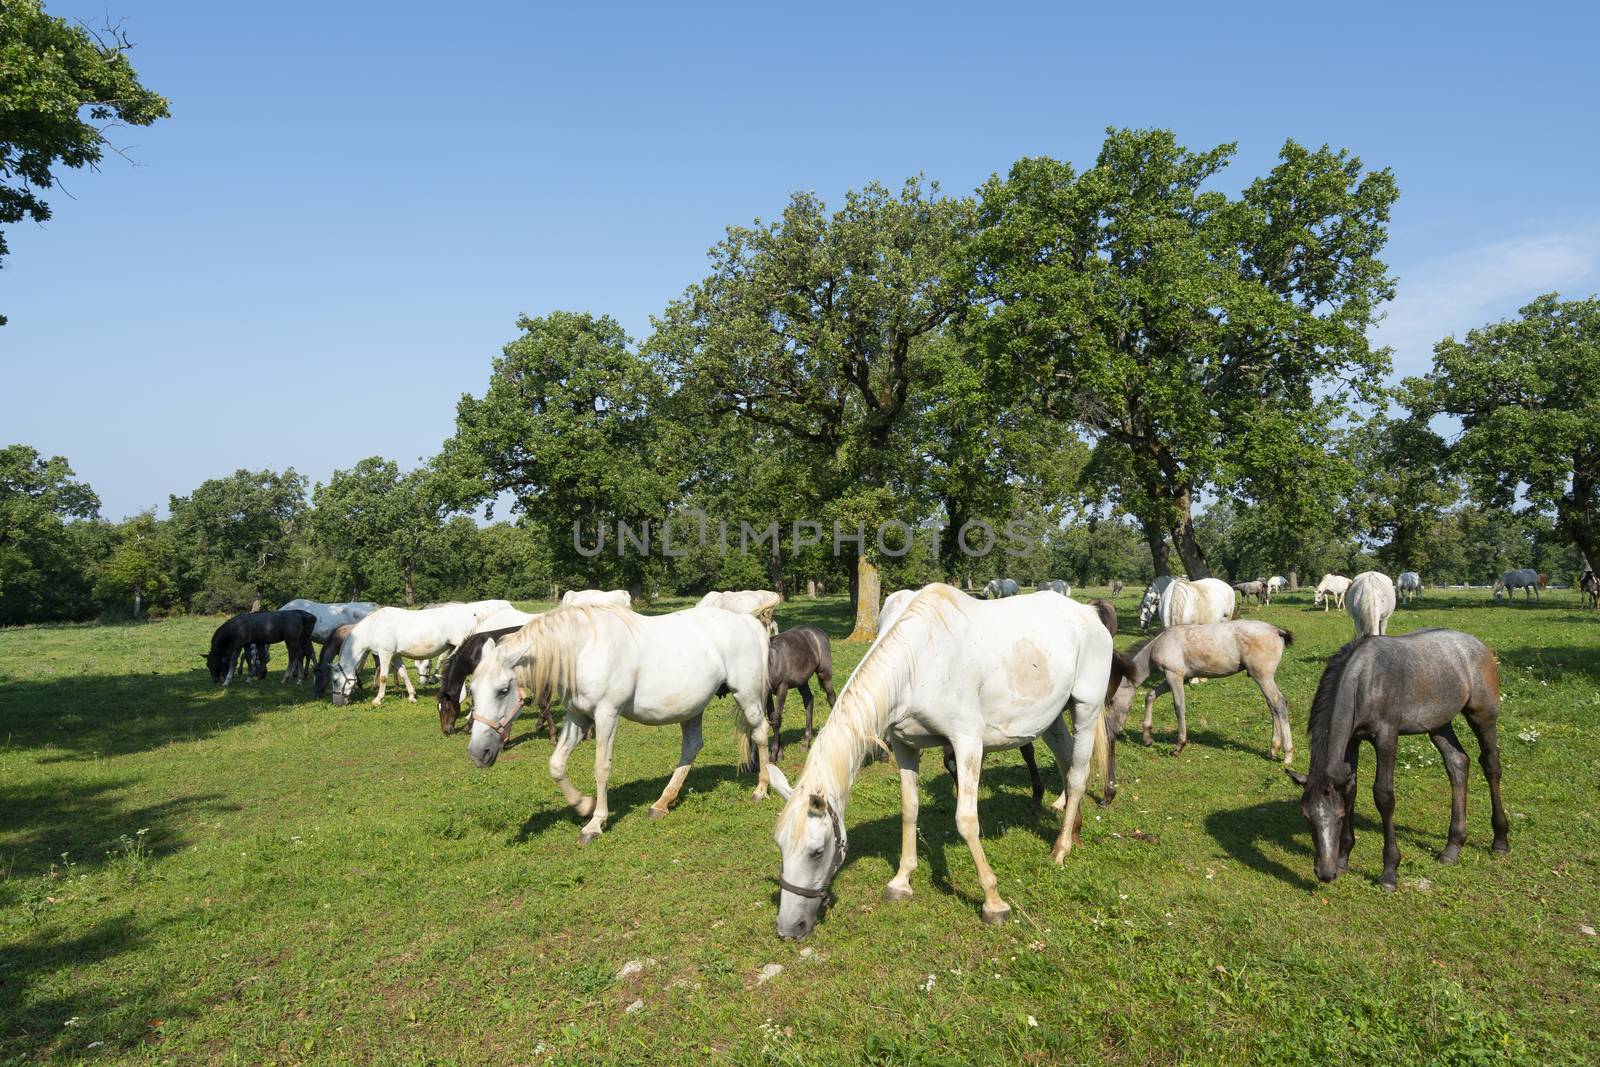  Lipizzaner horses grazing on a meadow